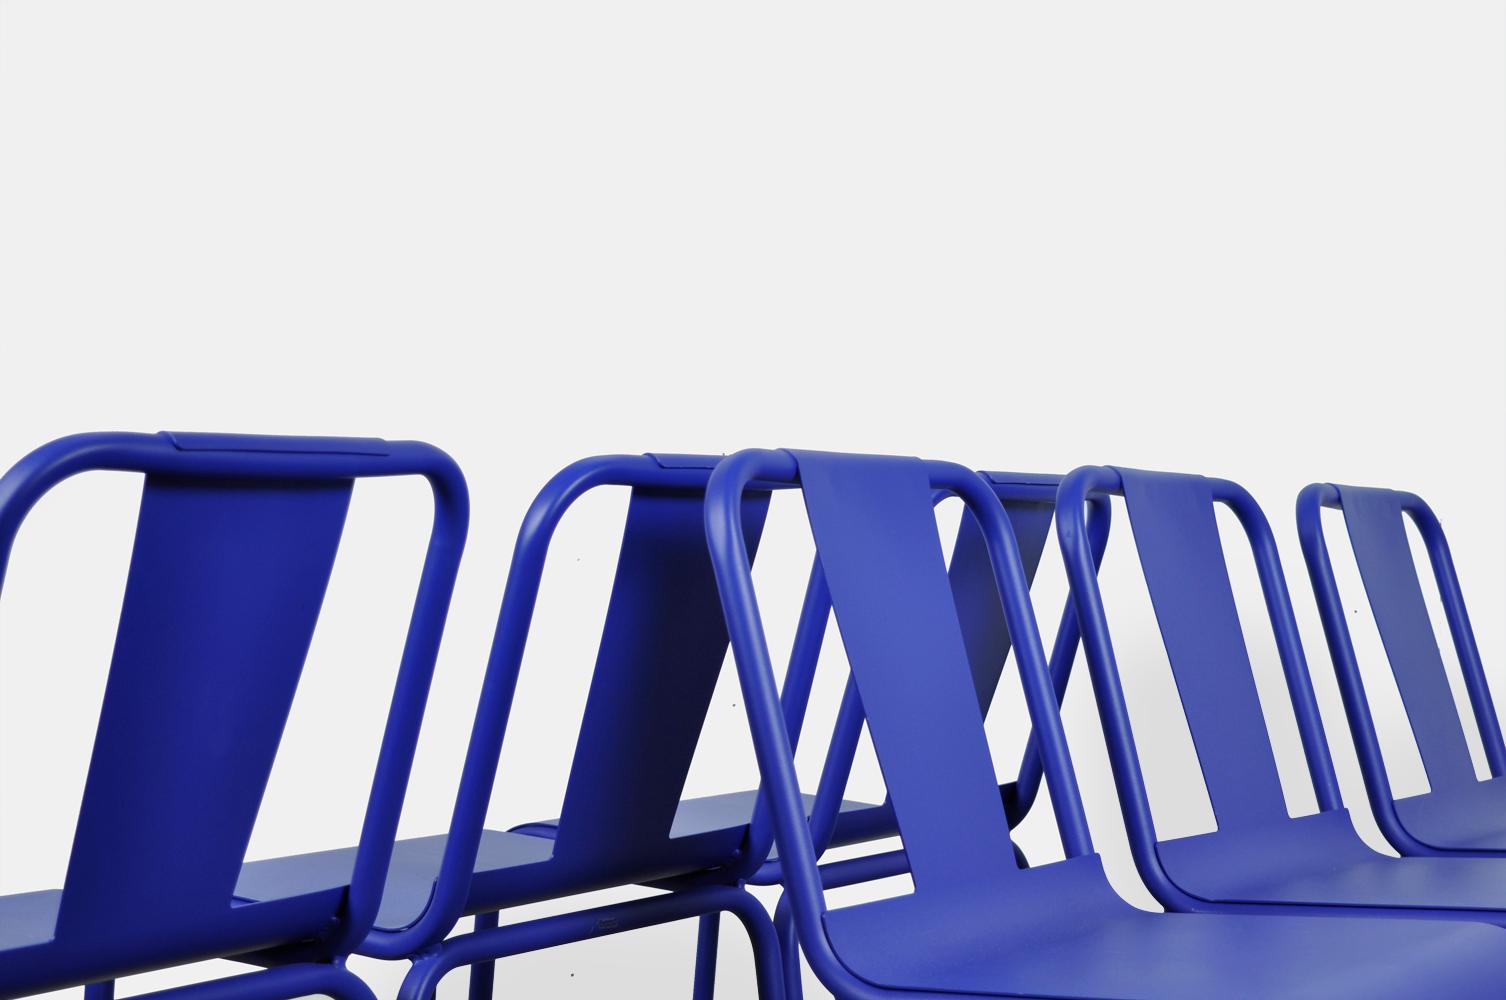 Powder-Coated Set of 6 Design Chairs by Isi Design Group, Produced by Isimar, 2000 Spain